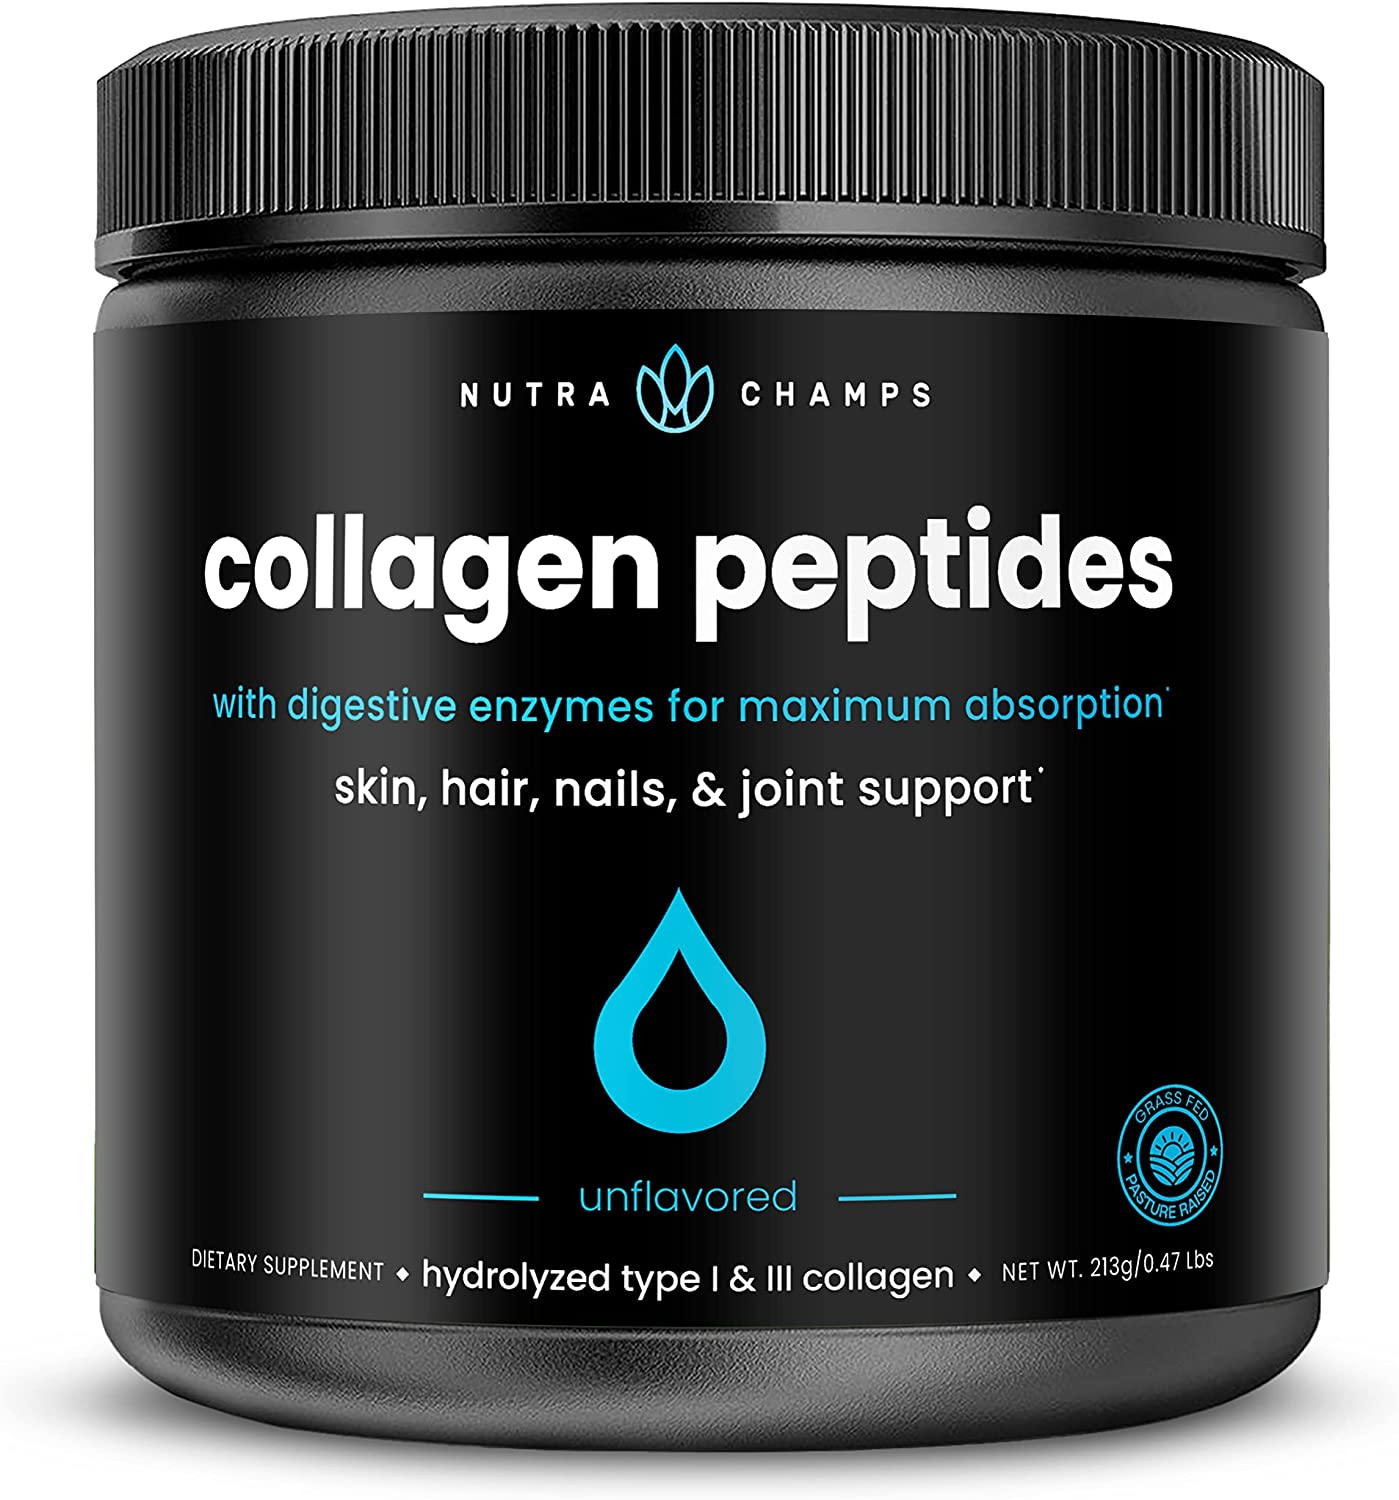 NutraChamps Anti-Aging Collagen Peptides Powder, 7.45-Ounce